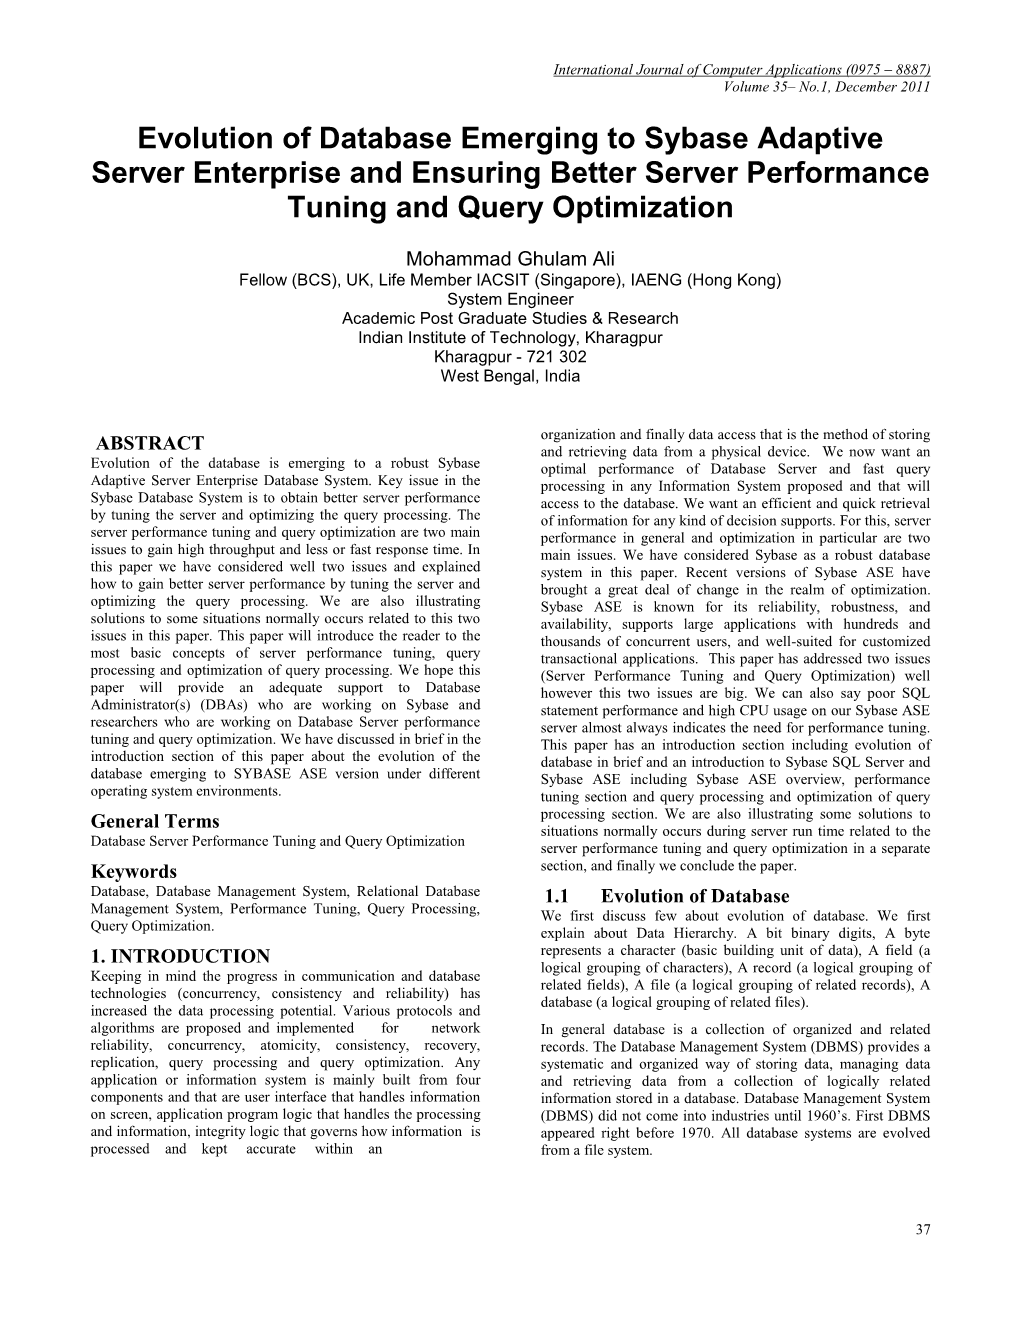 Evolution of Database Emerging to Sybase Adaptive Server Enterprise and Ensuring Better Server Performance Tuning and Query Optimization